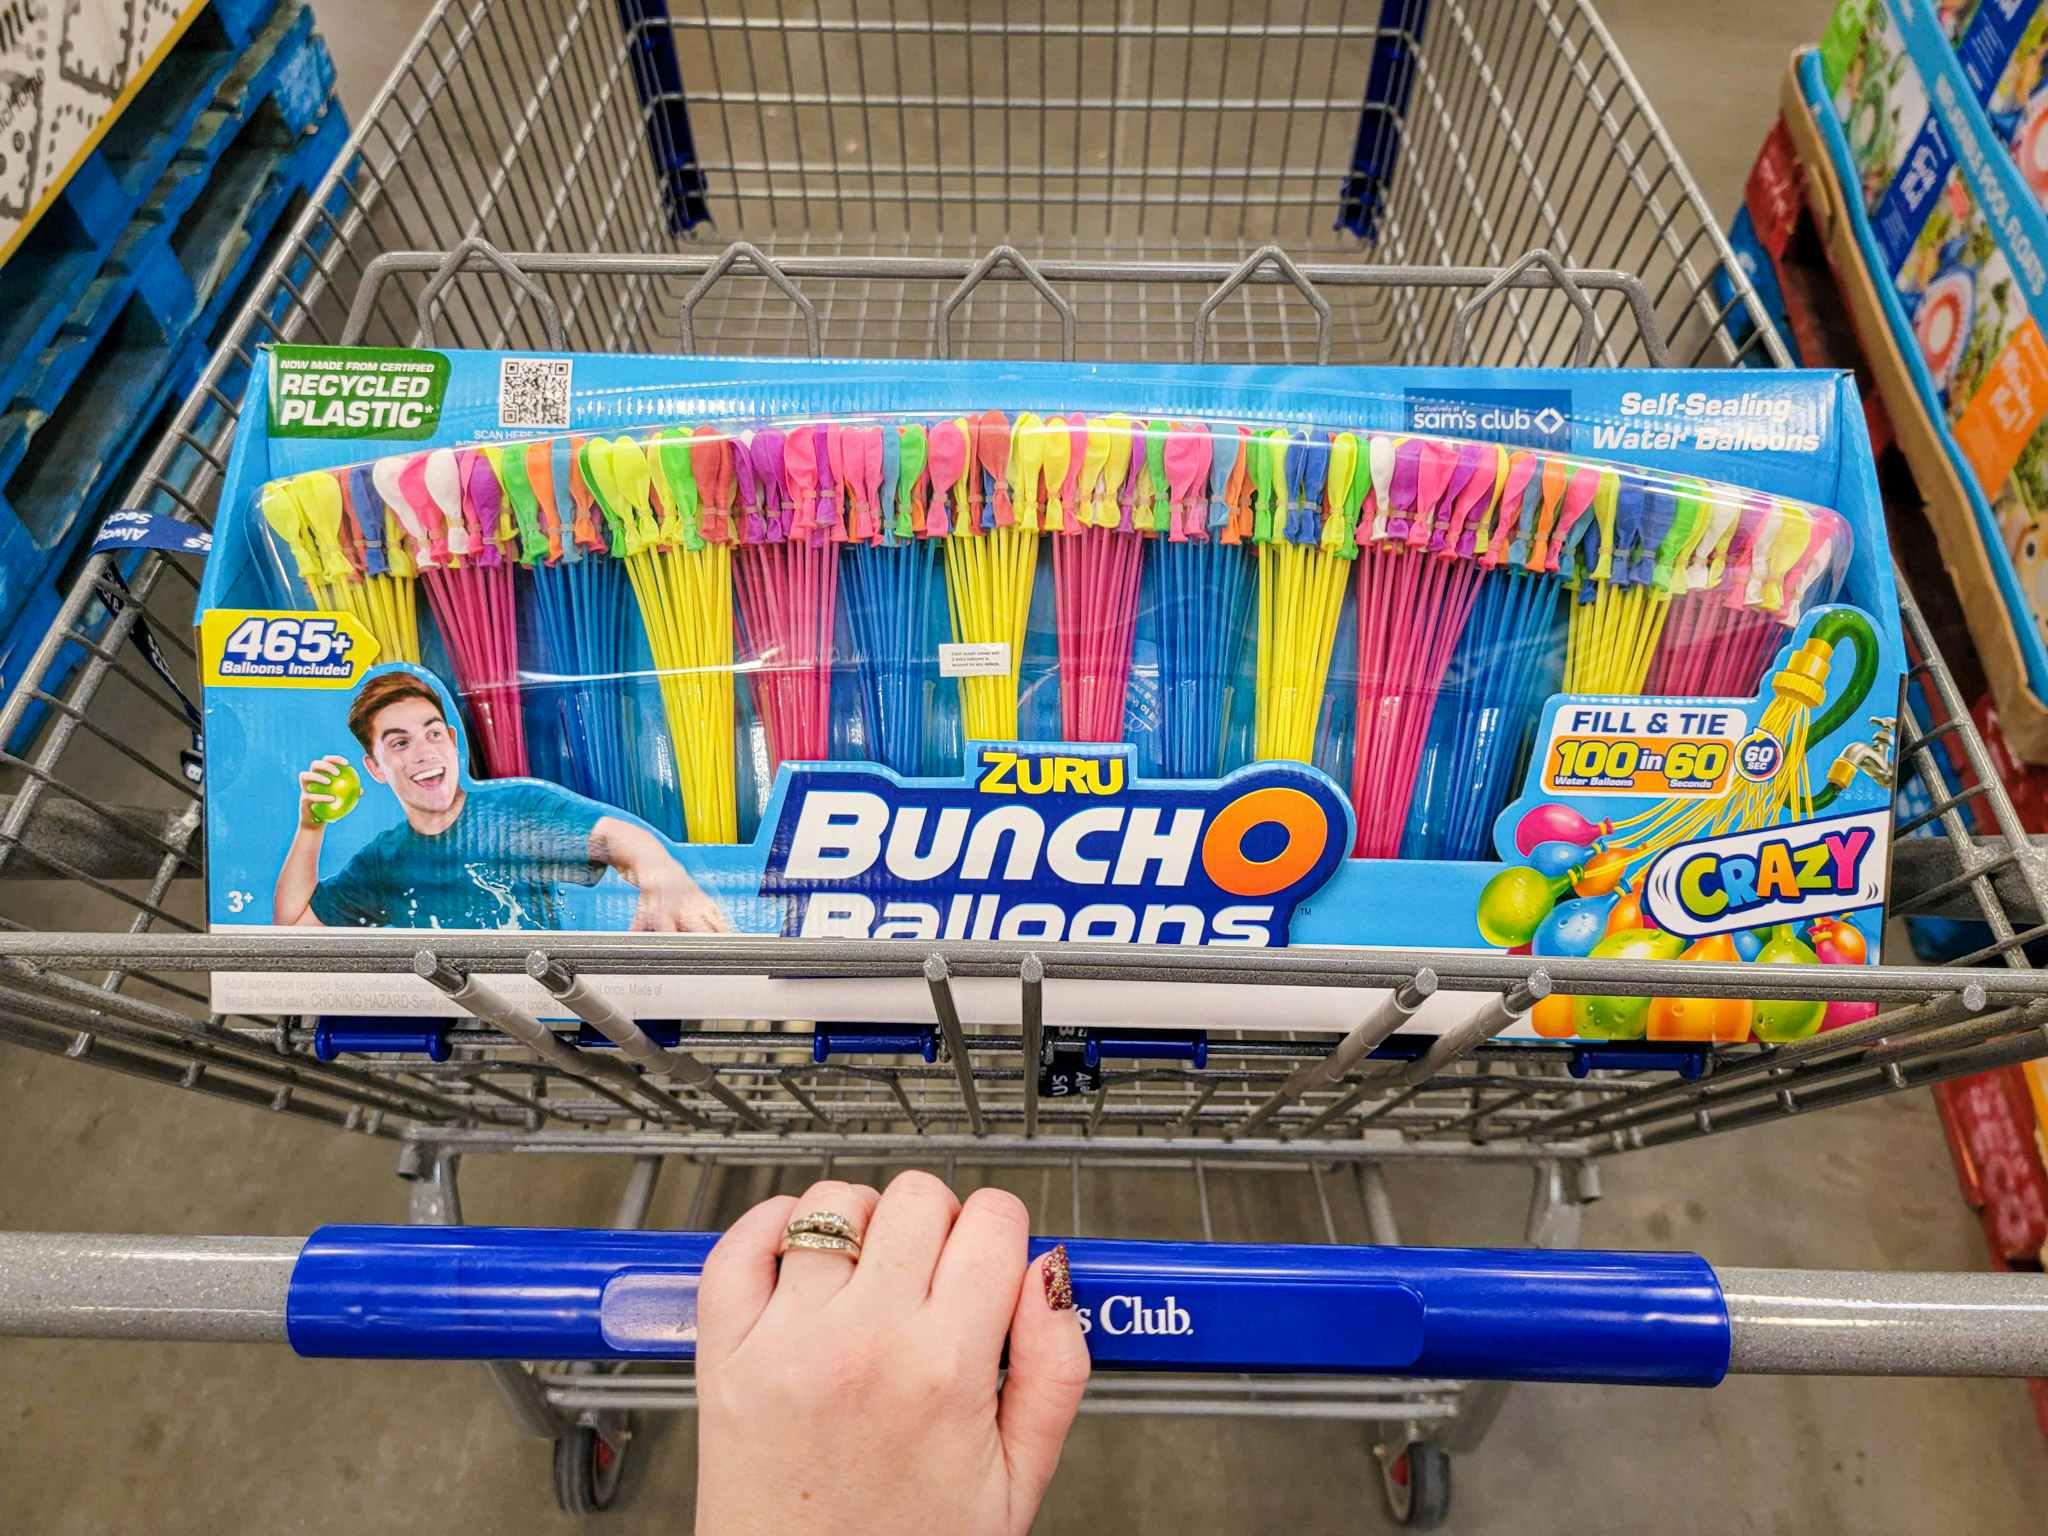 Bunch O Balloons 350-Pack of Quick-Fill Water Balloons, Just $15 on Amazon